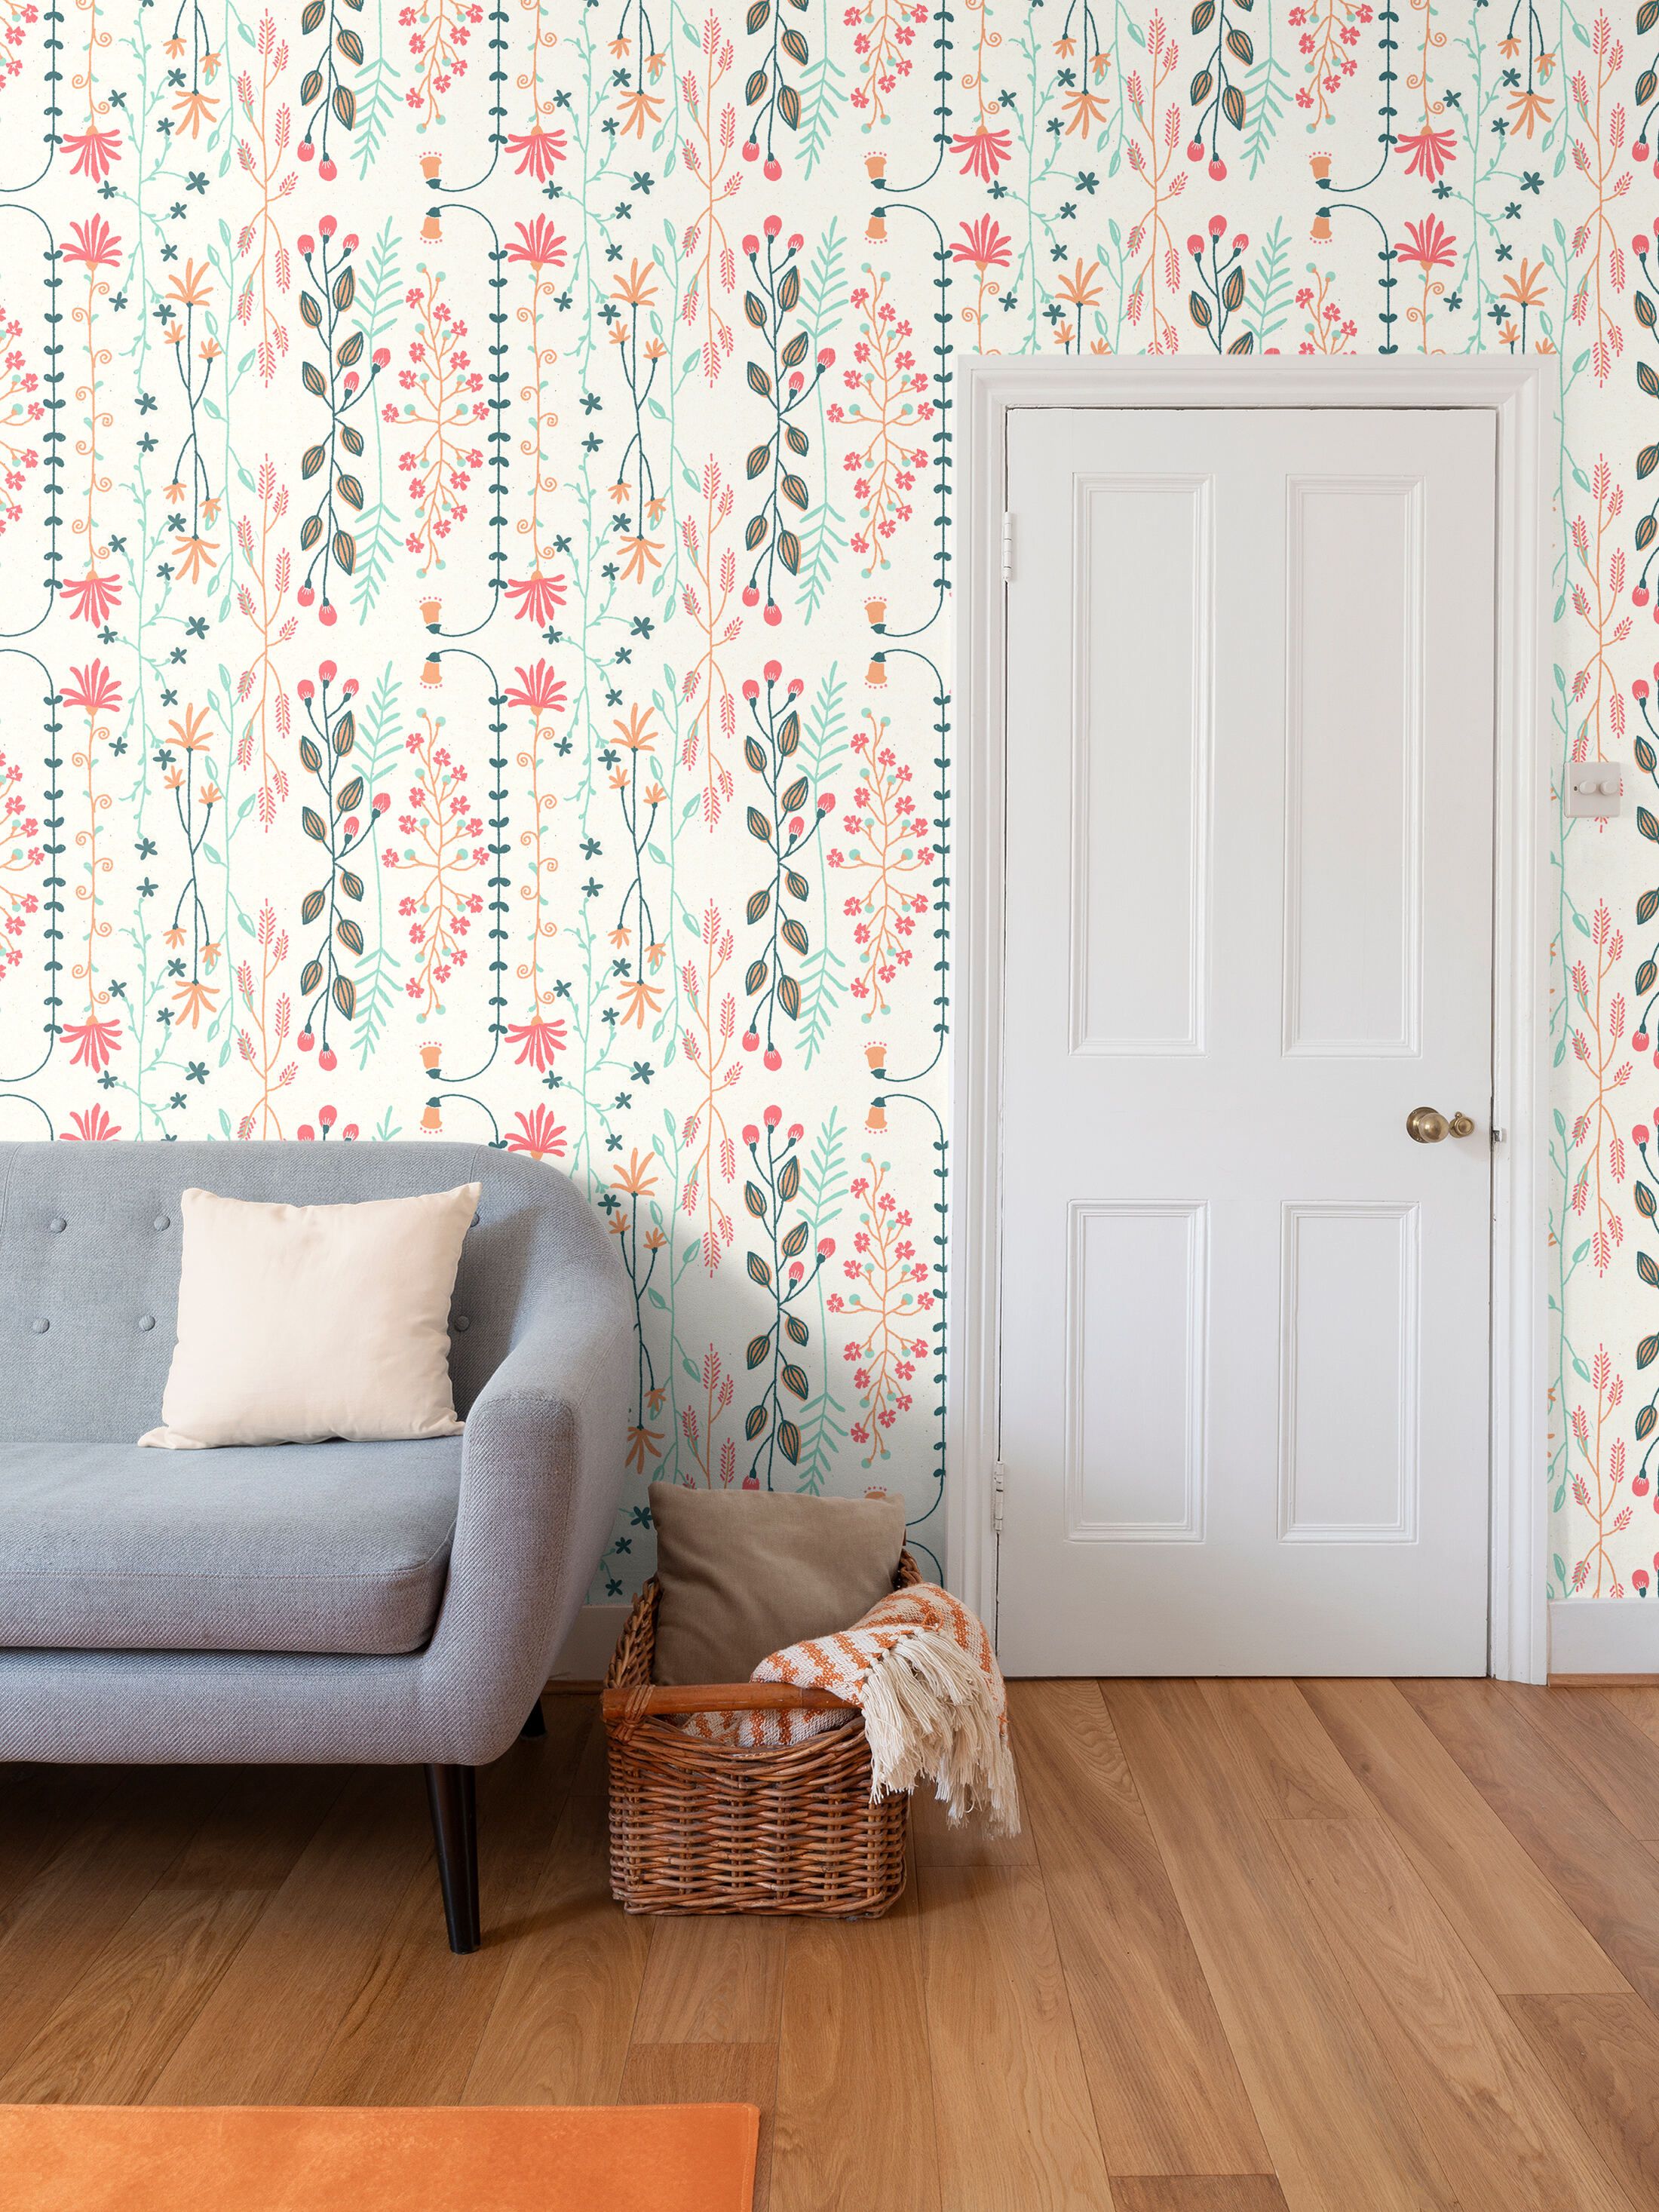 Bespoke Wallpaper. Make Your Own Wallpaper Printed And Cut In.